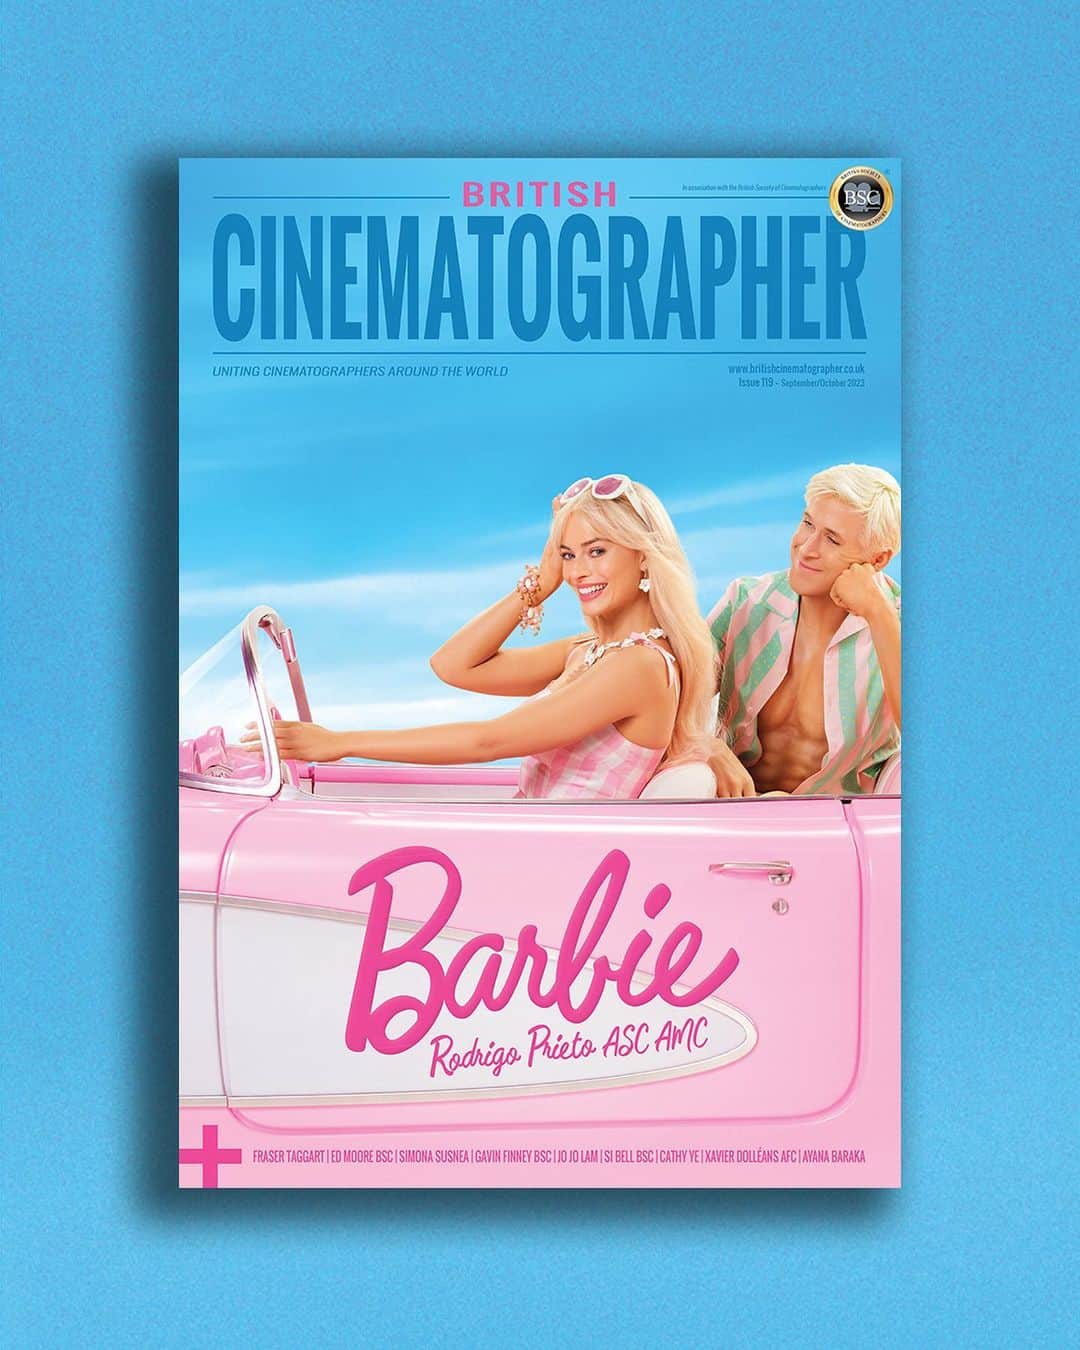 ロドリゴ・プリエトのインスタグラム：「Hi Barbie!   The September/October issue of British Cinematographer is now here! We’re delighted to reveal that #Barbie is our cover story special.  We’ve gone behind the scenes at the Barbie Dreamhouse (or the Mojo Dojo Casa House, if you prefer) to find out how cinematographer Rodrigo Prieto ASC AMC jumped at the chance to make Greta Gerwig’s vision of “authentic artificiality” a reality.   Prieto shares his approach to framing in Barbie Land, helping Gerwig transition to shooting digitally, and his emblematic choice of colour palette.   ELSEWHERE IN THE ISSUE...  Fraser Taggart on Mission: Impossible - Dead Reckoning Part One  Special Feature: Strike Action  Our Tech-Nique section goes deep on AI  The second part of our diversity and inclusion The Bigger Picture special continues  Meet the New Wave: Olan Collardy  Gavin Finney BSC talks Good Omens S2  Ed Moore BSC chats Hijack  Simona Susnea fills us in on Heartstopper S2  Si Bell BSC takes us BTS on The Woman in the Wall  Our latest In The Frame profile is German gaffer Thorsten Kosellek.  As well as entertaining readers with his latest Letter From America, Steven Poster ASC is also the star of this issue’s Visionary feature.   Hear from more DPs on their latest and greatest projects, including Cathy Ye on Bone Black and Jo Jo Lam on Playland.  Our latest Masterclass sees Xavier Dolléans AFC share his innovative use of the AGITO for Marinette.  DP Ayana Baraka peels back the curtain on Alicia Keys’ She Is The Music (SITM) songwriting camp in this month’s Music in Motion.  Delve into the extraordinary career of Kubrick collaborator John Alcott BSC.  Look forward to the goings-on at September’s IBC and see if you can spot yourself in our round-up of the BSC Summer Lunch.  Discover the Hollywood history of Litepanels.  There’s all the latest news and insight from the post-production sphere in Set to Post.  You can also read about the latest news and industry happenings from GBCT, IMAGO, and more!」